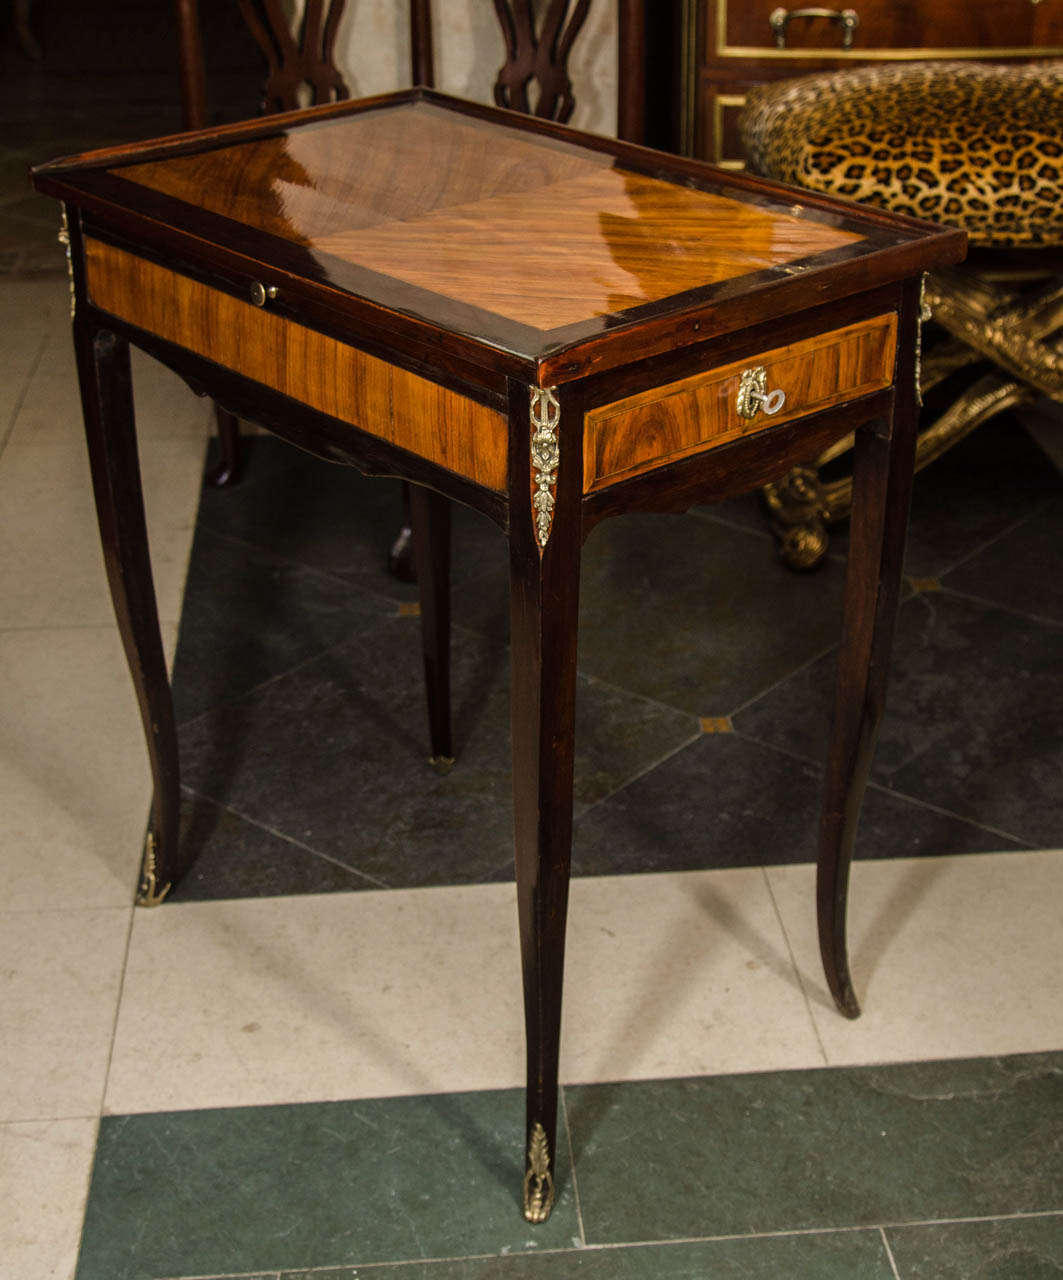 A fine French Louis XV- XVI transitional inlaid and crossbanded table a ecrire with side drawer and large leather top writing slide.